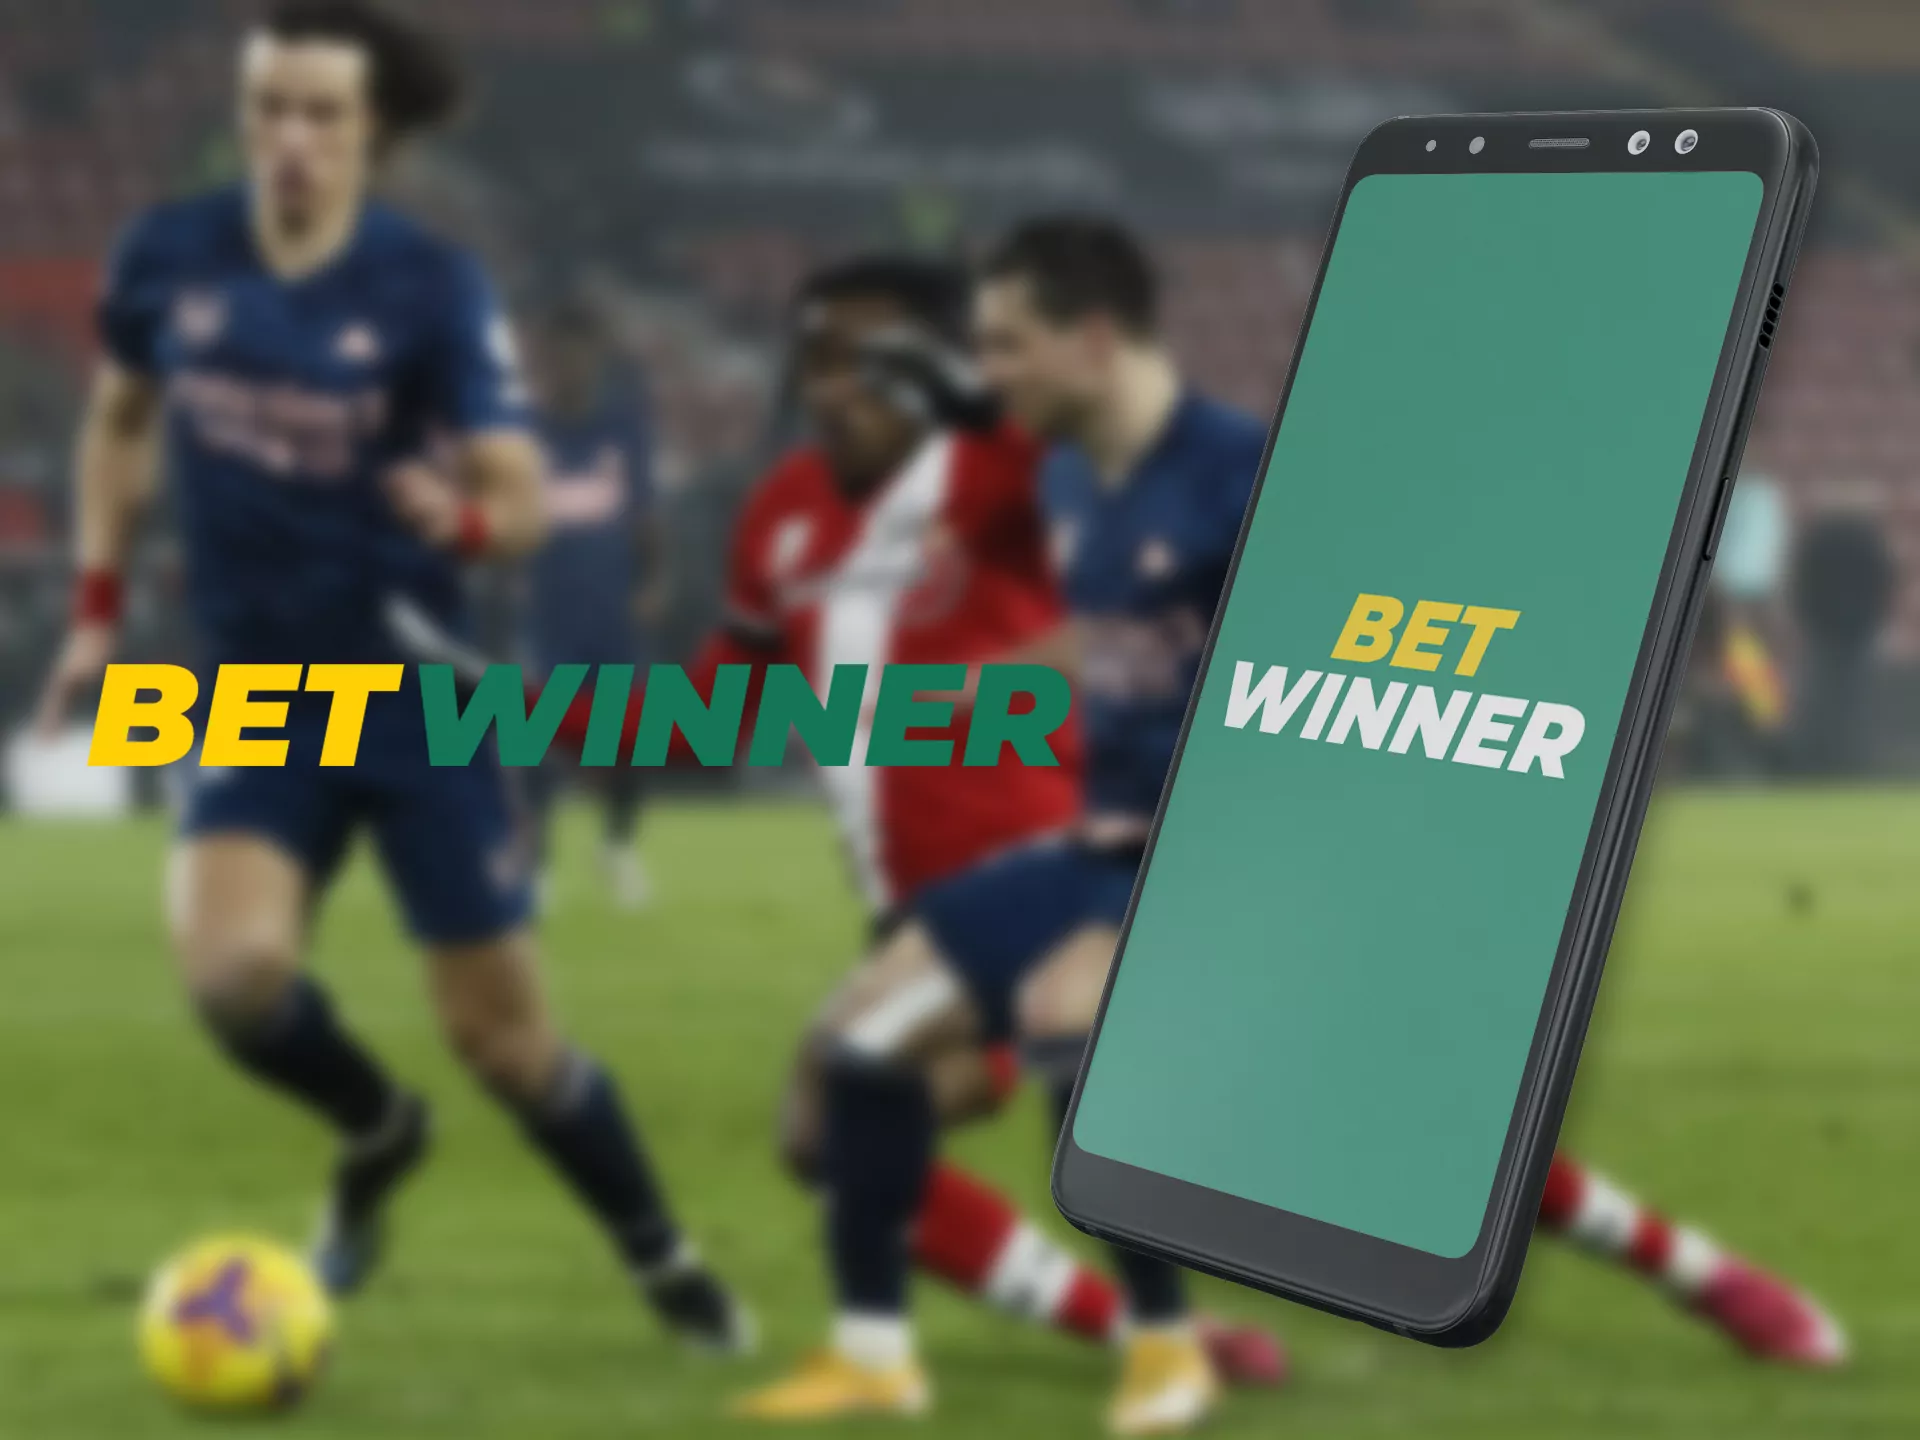 betwinner is a best soccer betting company.